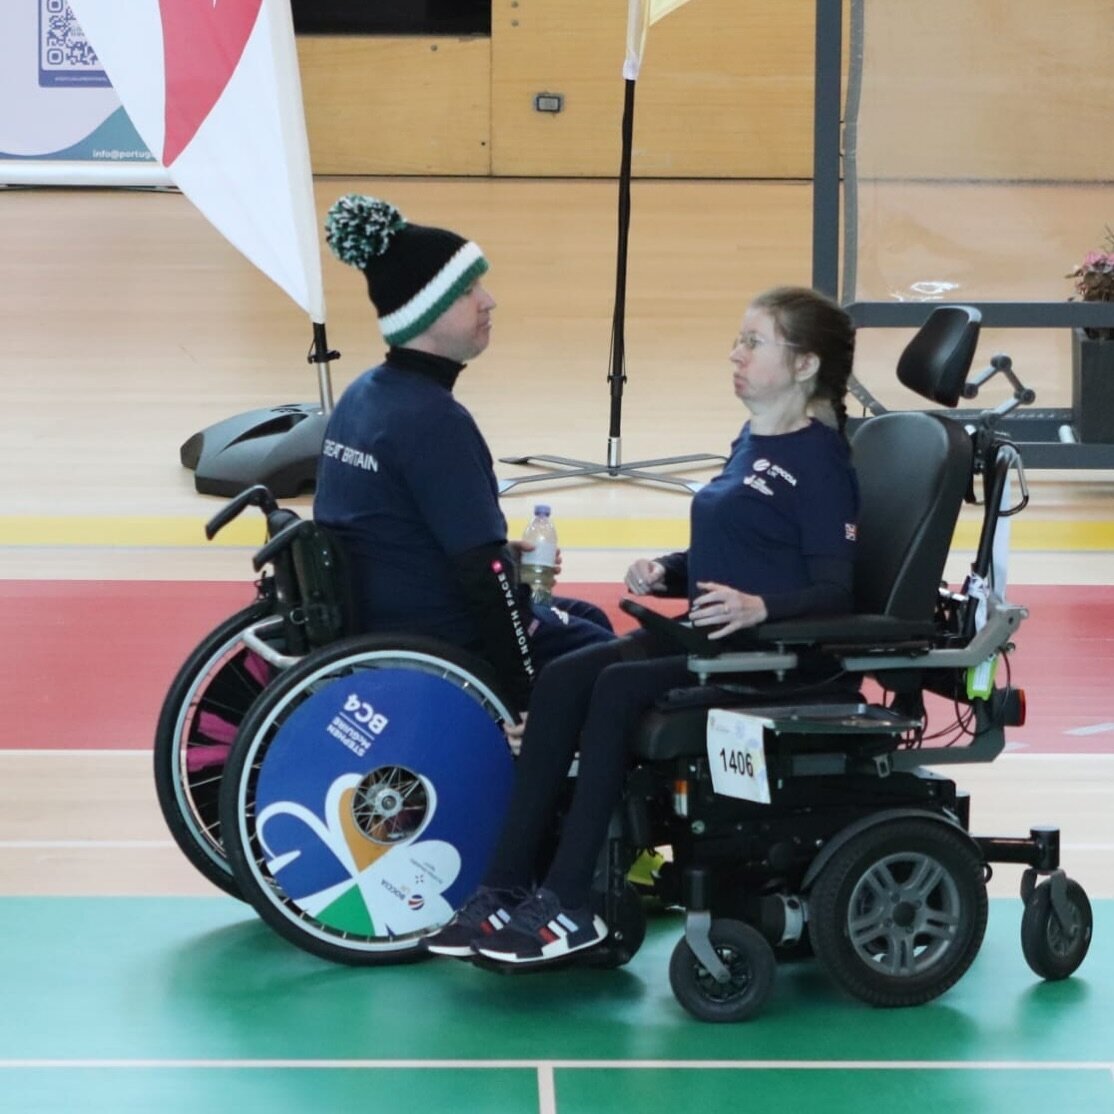 And it&rsquo;s a 4-2 win for the BC4s against Germany. A nice way to end what has been a pretty tough week for them.

The journey to Paris ends here for @bocciabhoy and @fi21011 but they have made huge progress over the past year so let&rsquo;s hear 